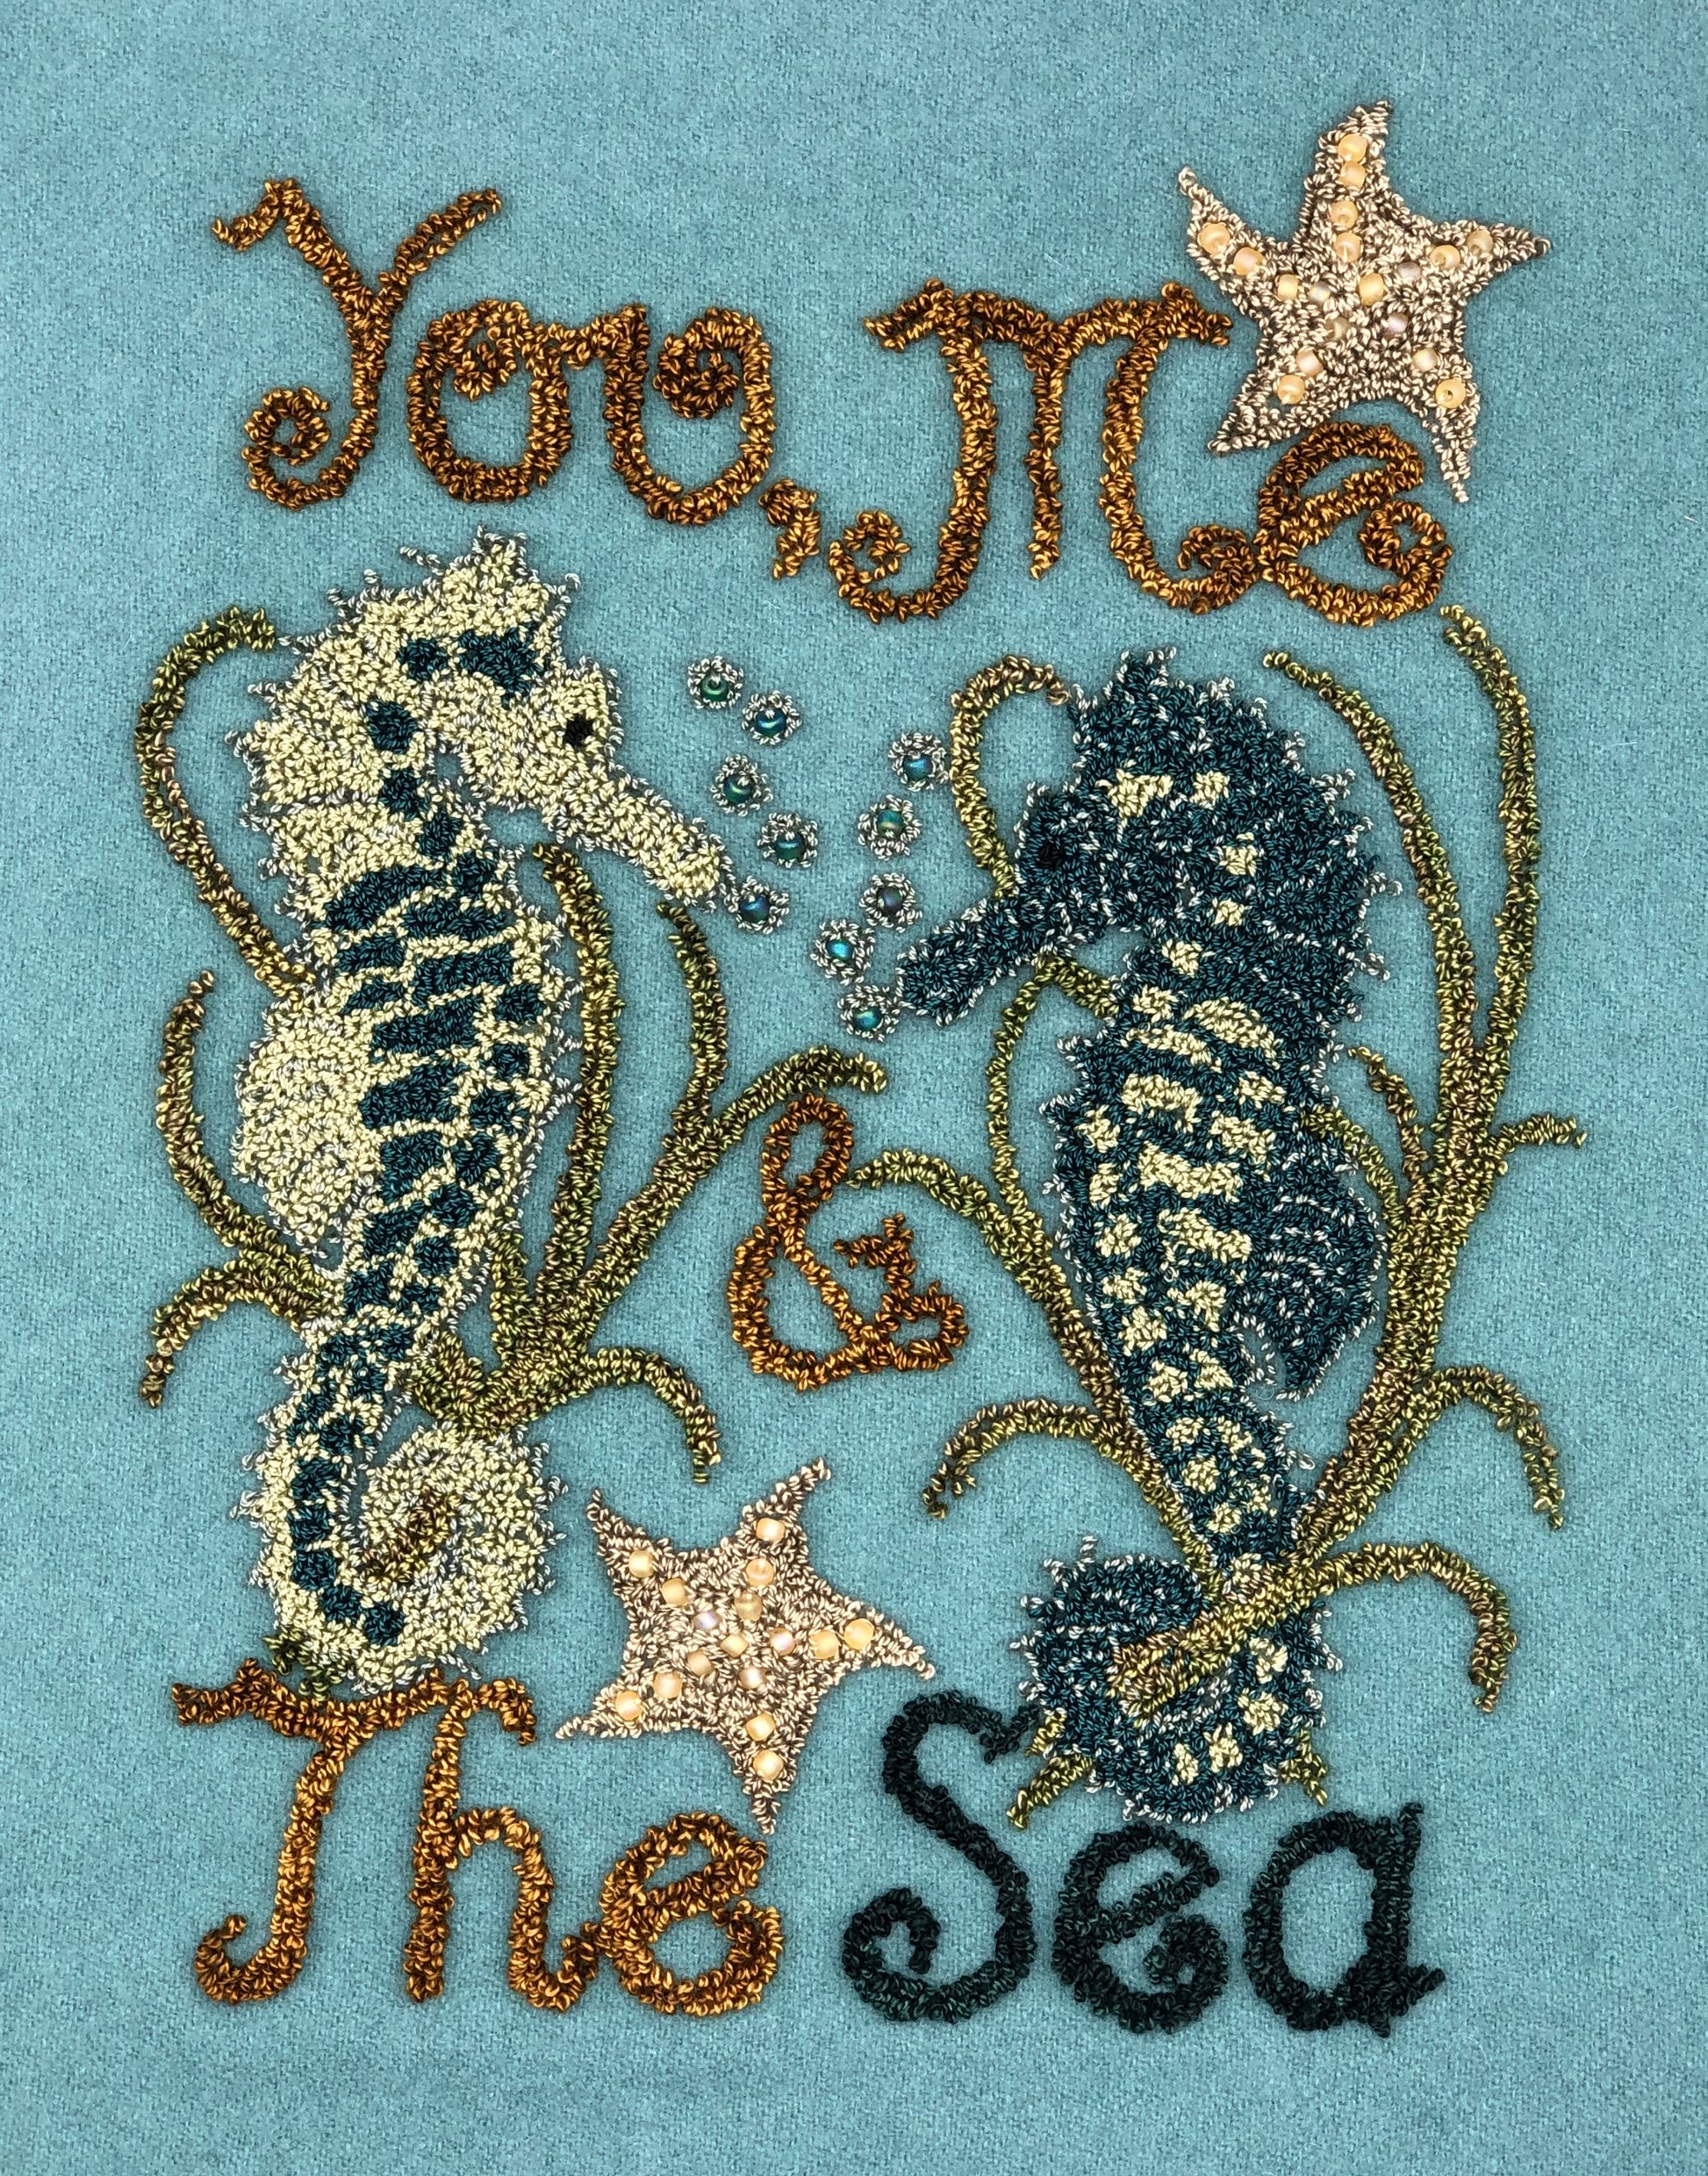 You, Me & The Sea, Rug Hooking Paper Pattern by Orphaned Wool. This pattern shown is the punch needle version of the pattern to show the design and colors. This patten make a wonderful undersea design with the Sea Horses and starfish. The paper pattern is formatted for enlargement, so you can choose what size pattern you would like to create. Size suggestions and color guide are all included in with the pattern.